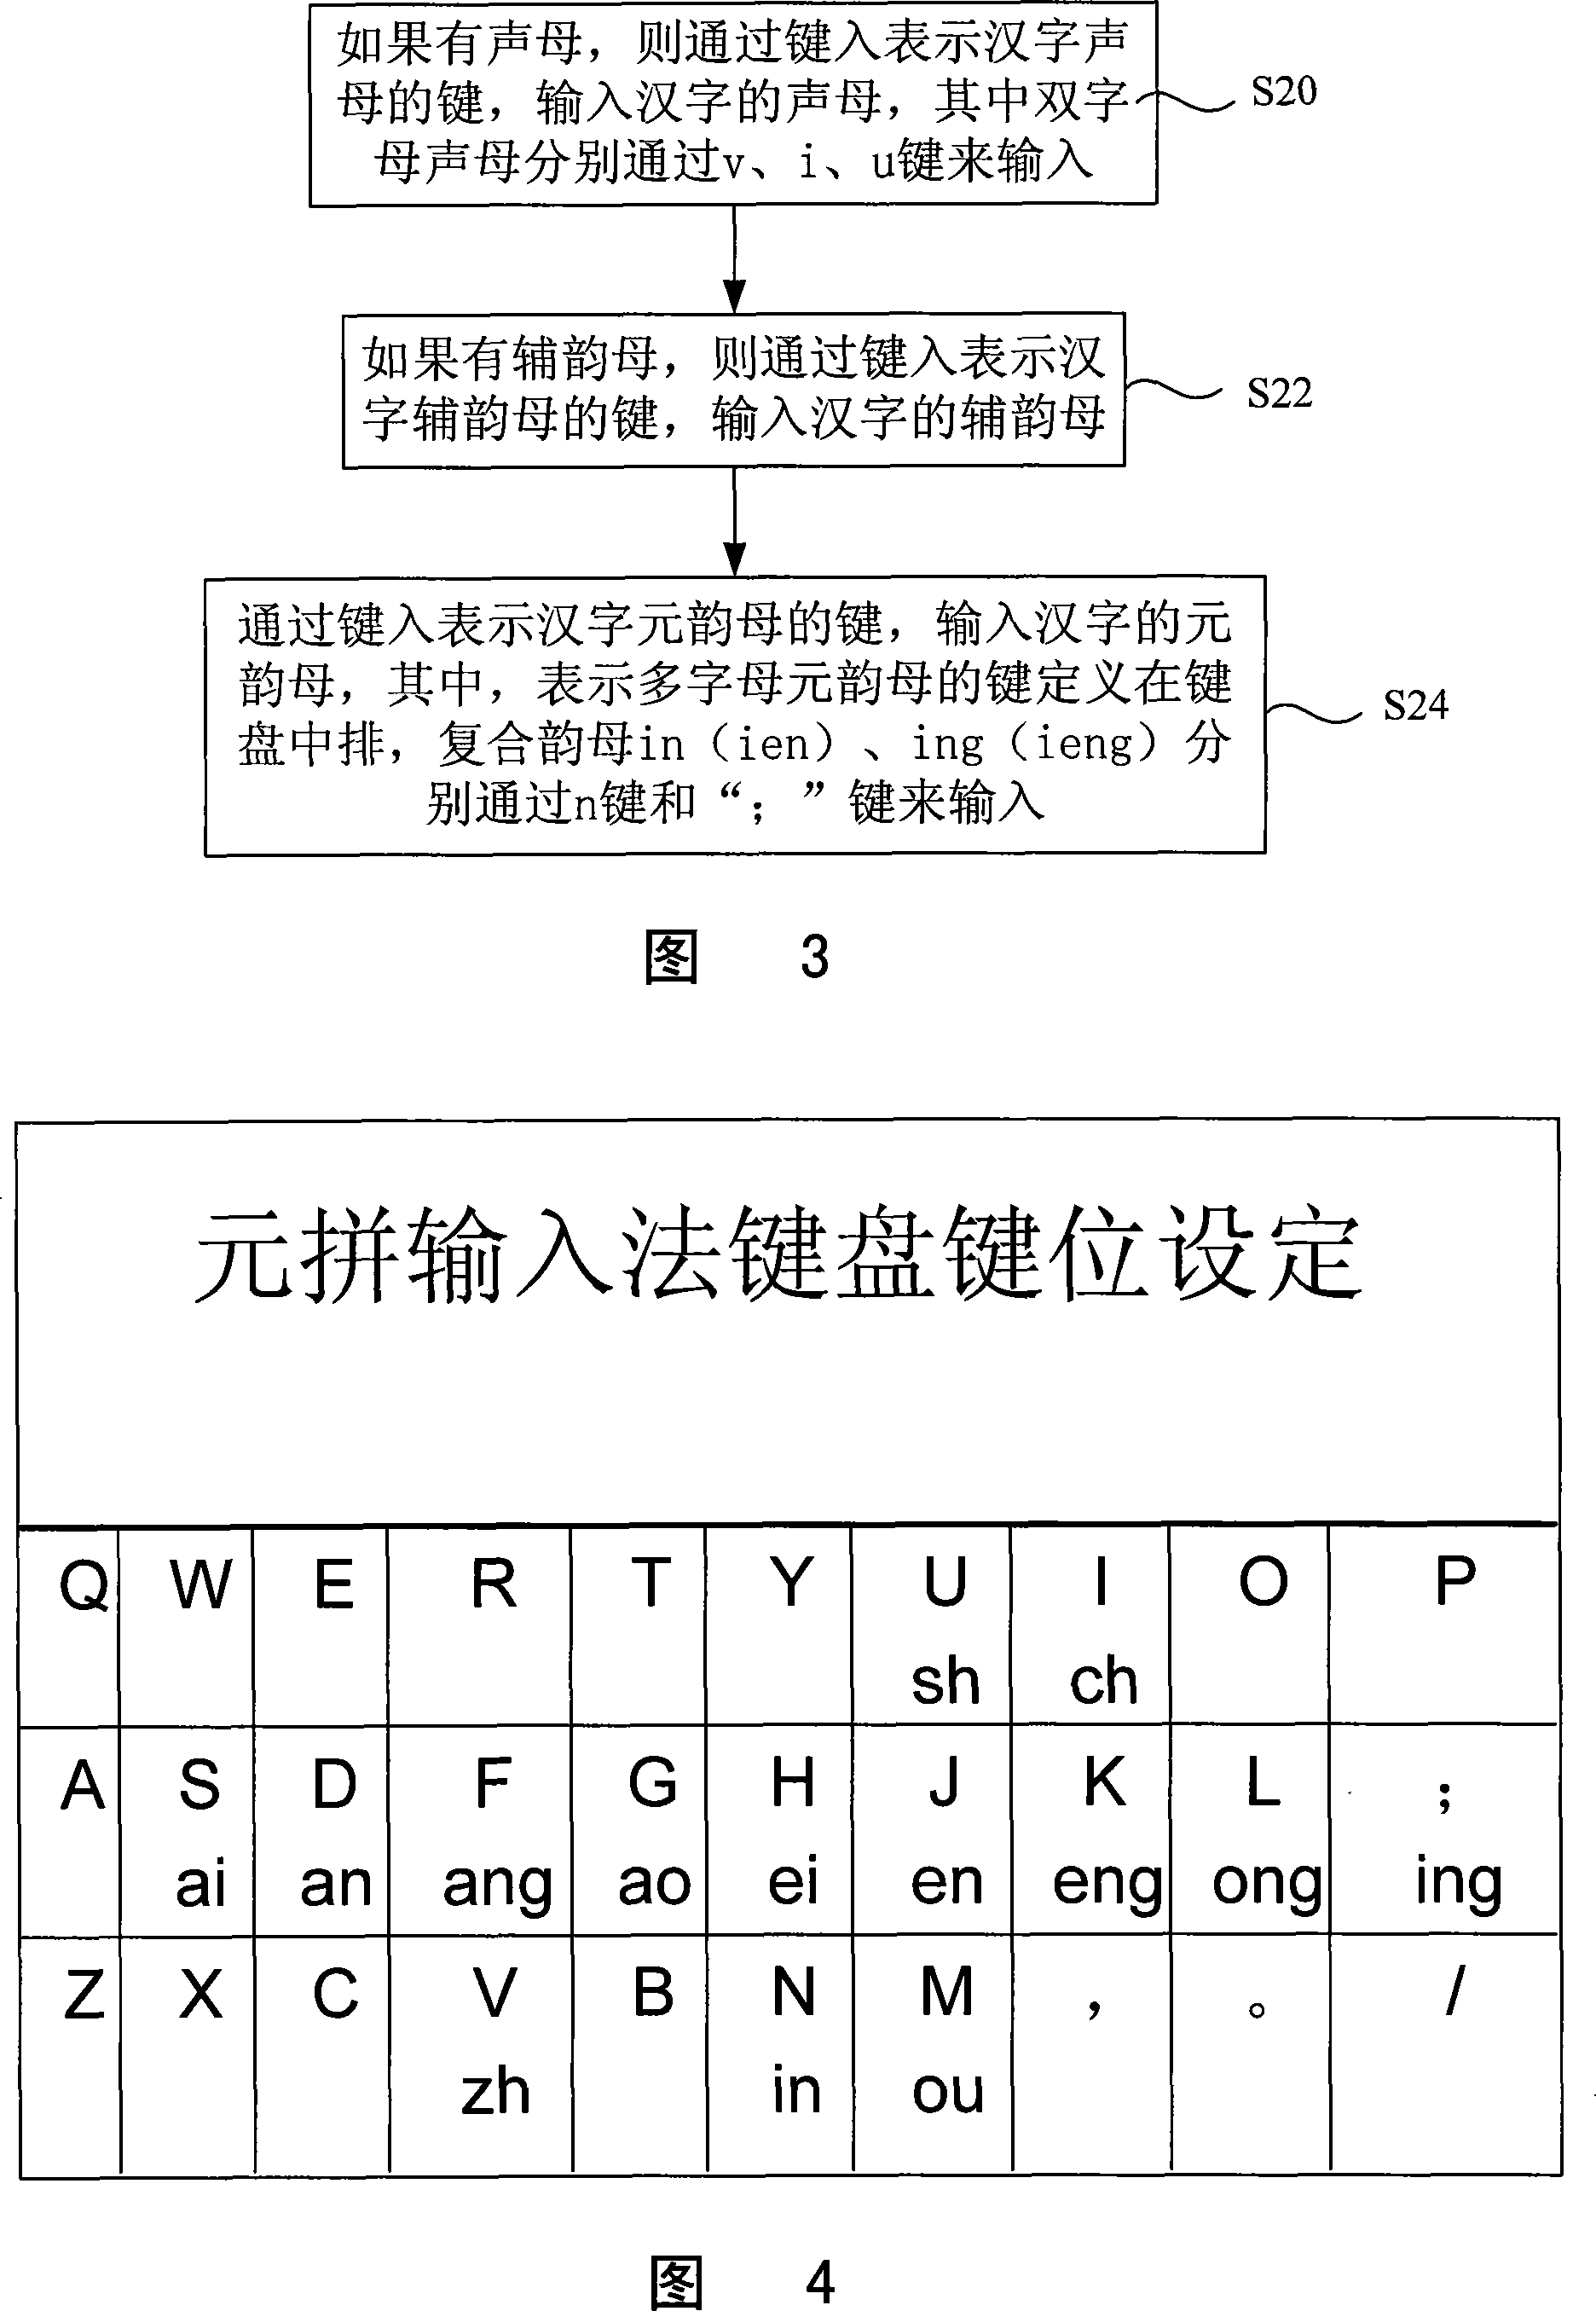 Vowel pinyin Chinese characters input method